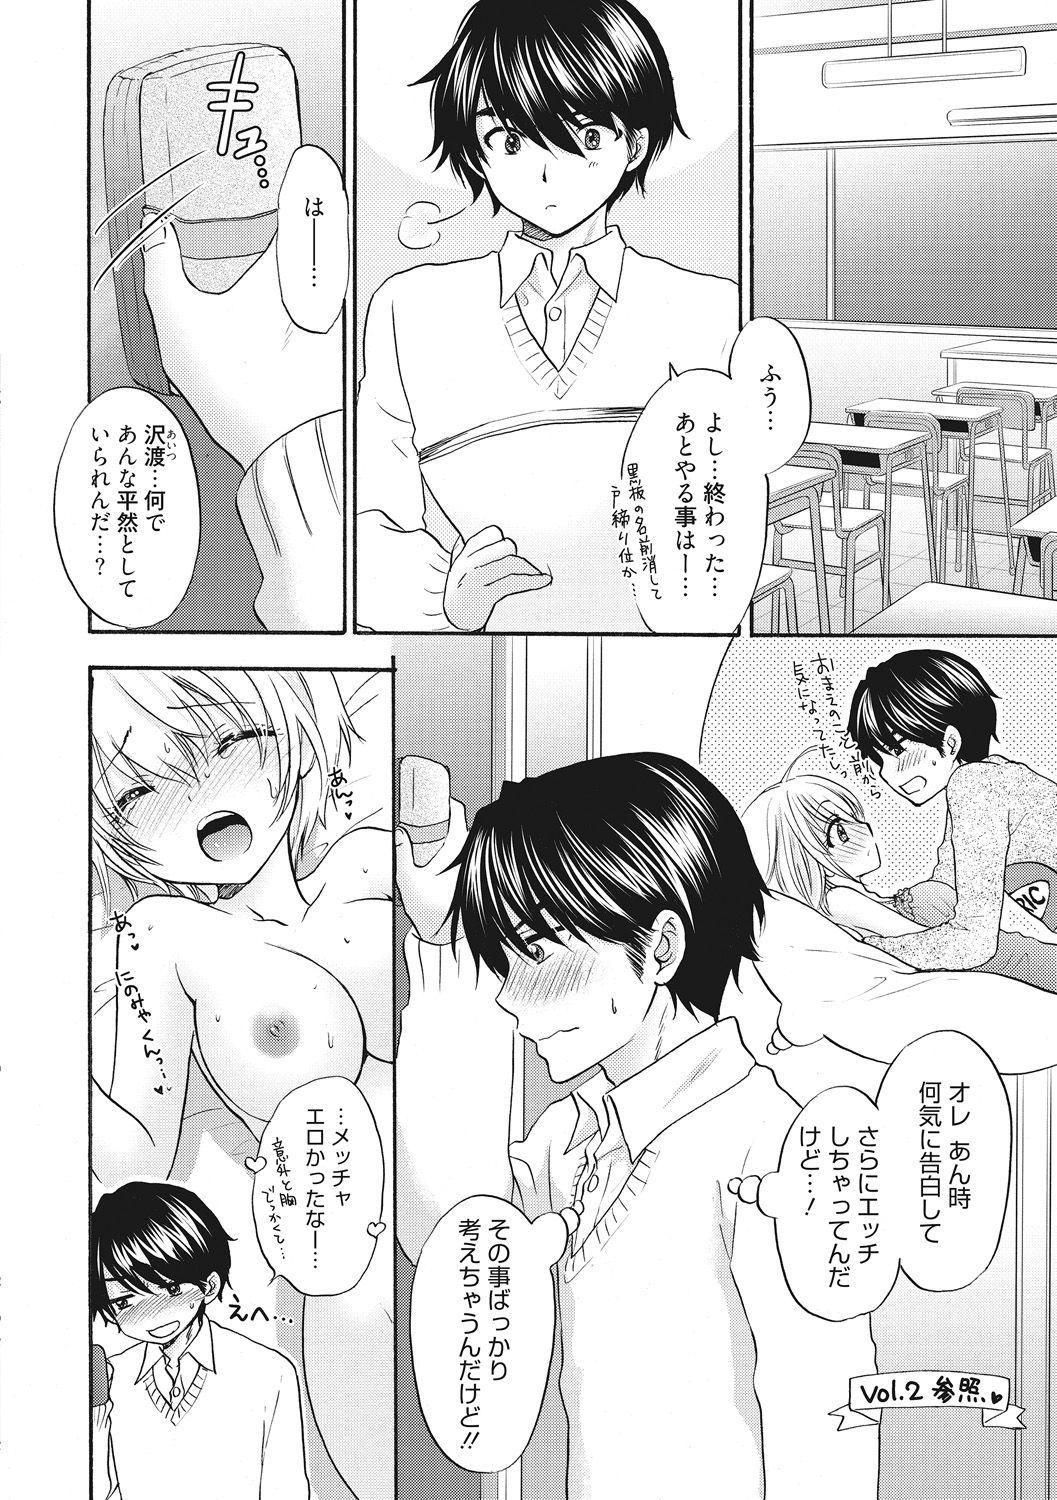 Petite Teen Houkago Love Mode 13 Point Of View - Page 2